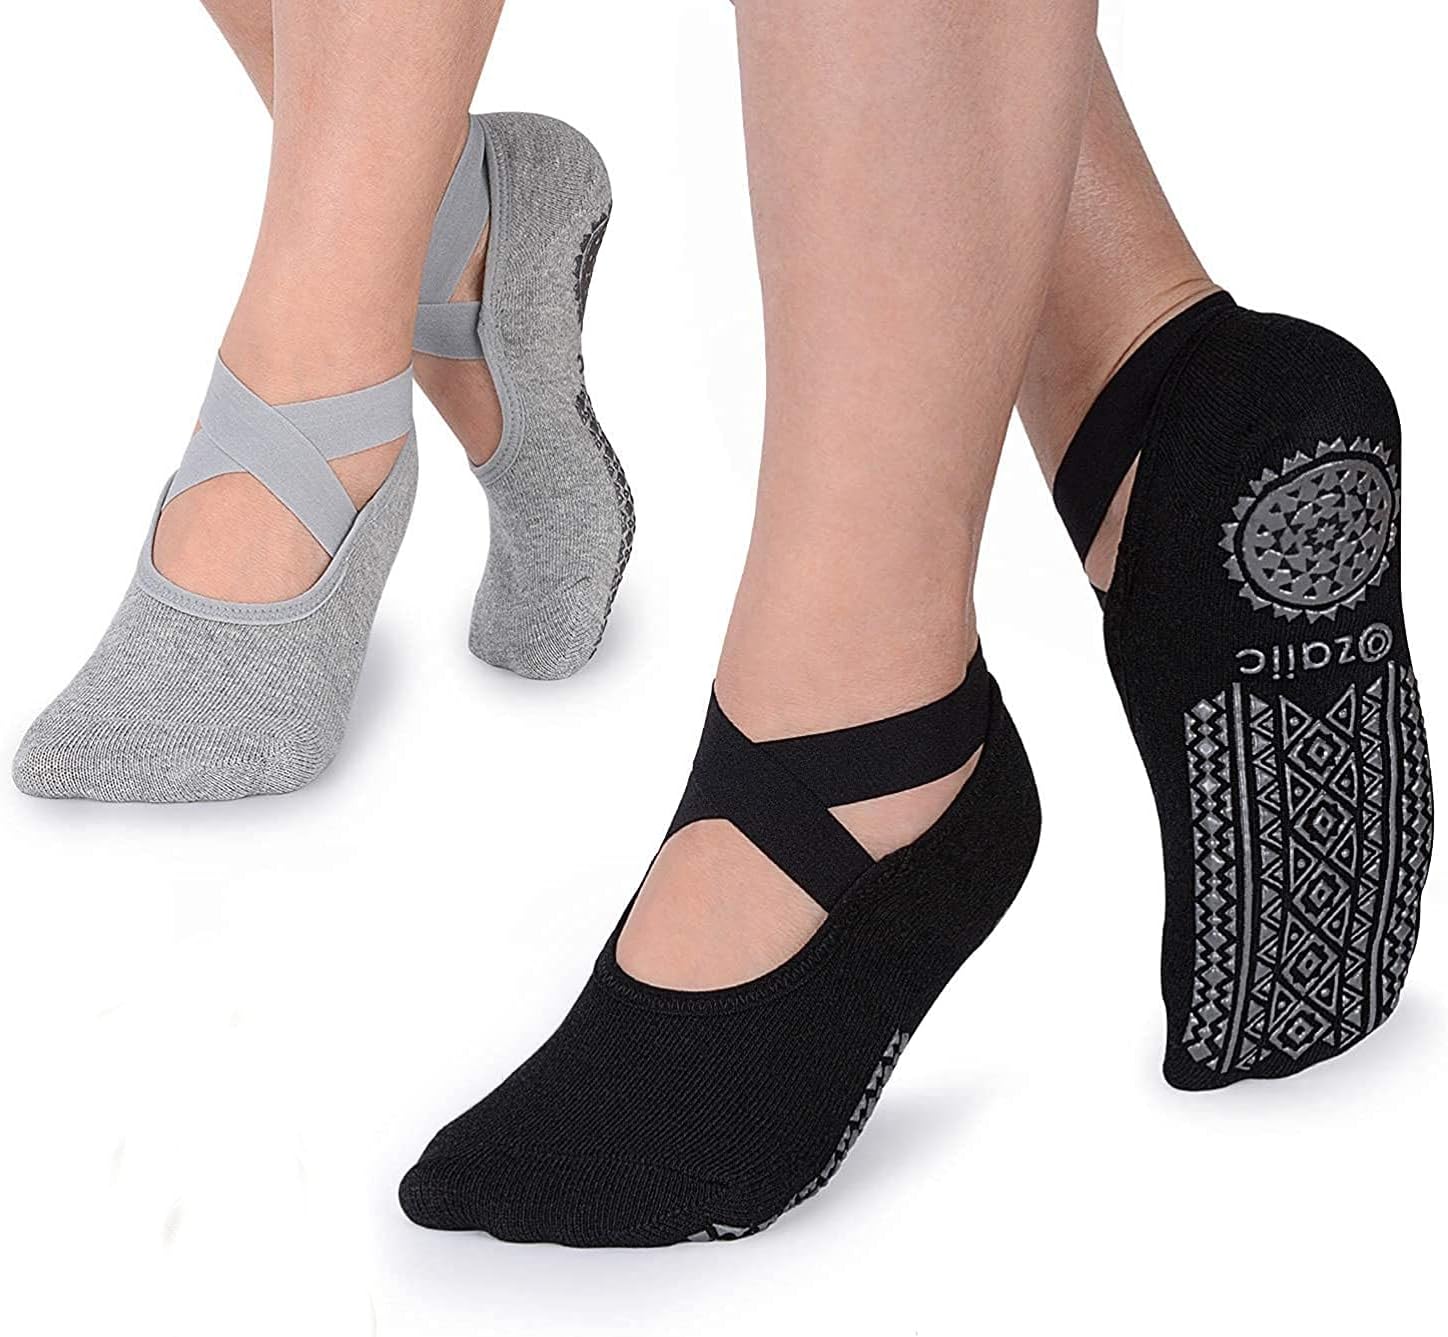 AioTio Strap Non-slip Yoga Socks for Women,Yoga Special Sports Socks,PVC Particles not Only Non-slip but Also Can Massage the Soles of the Feet